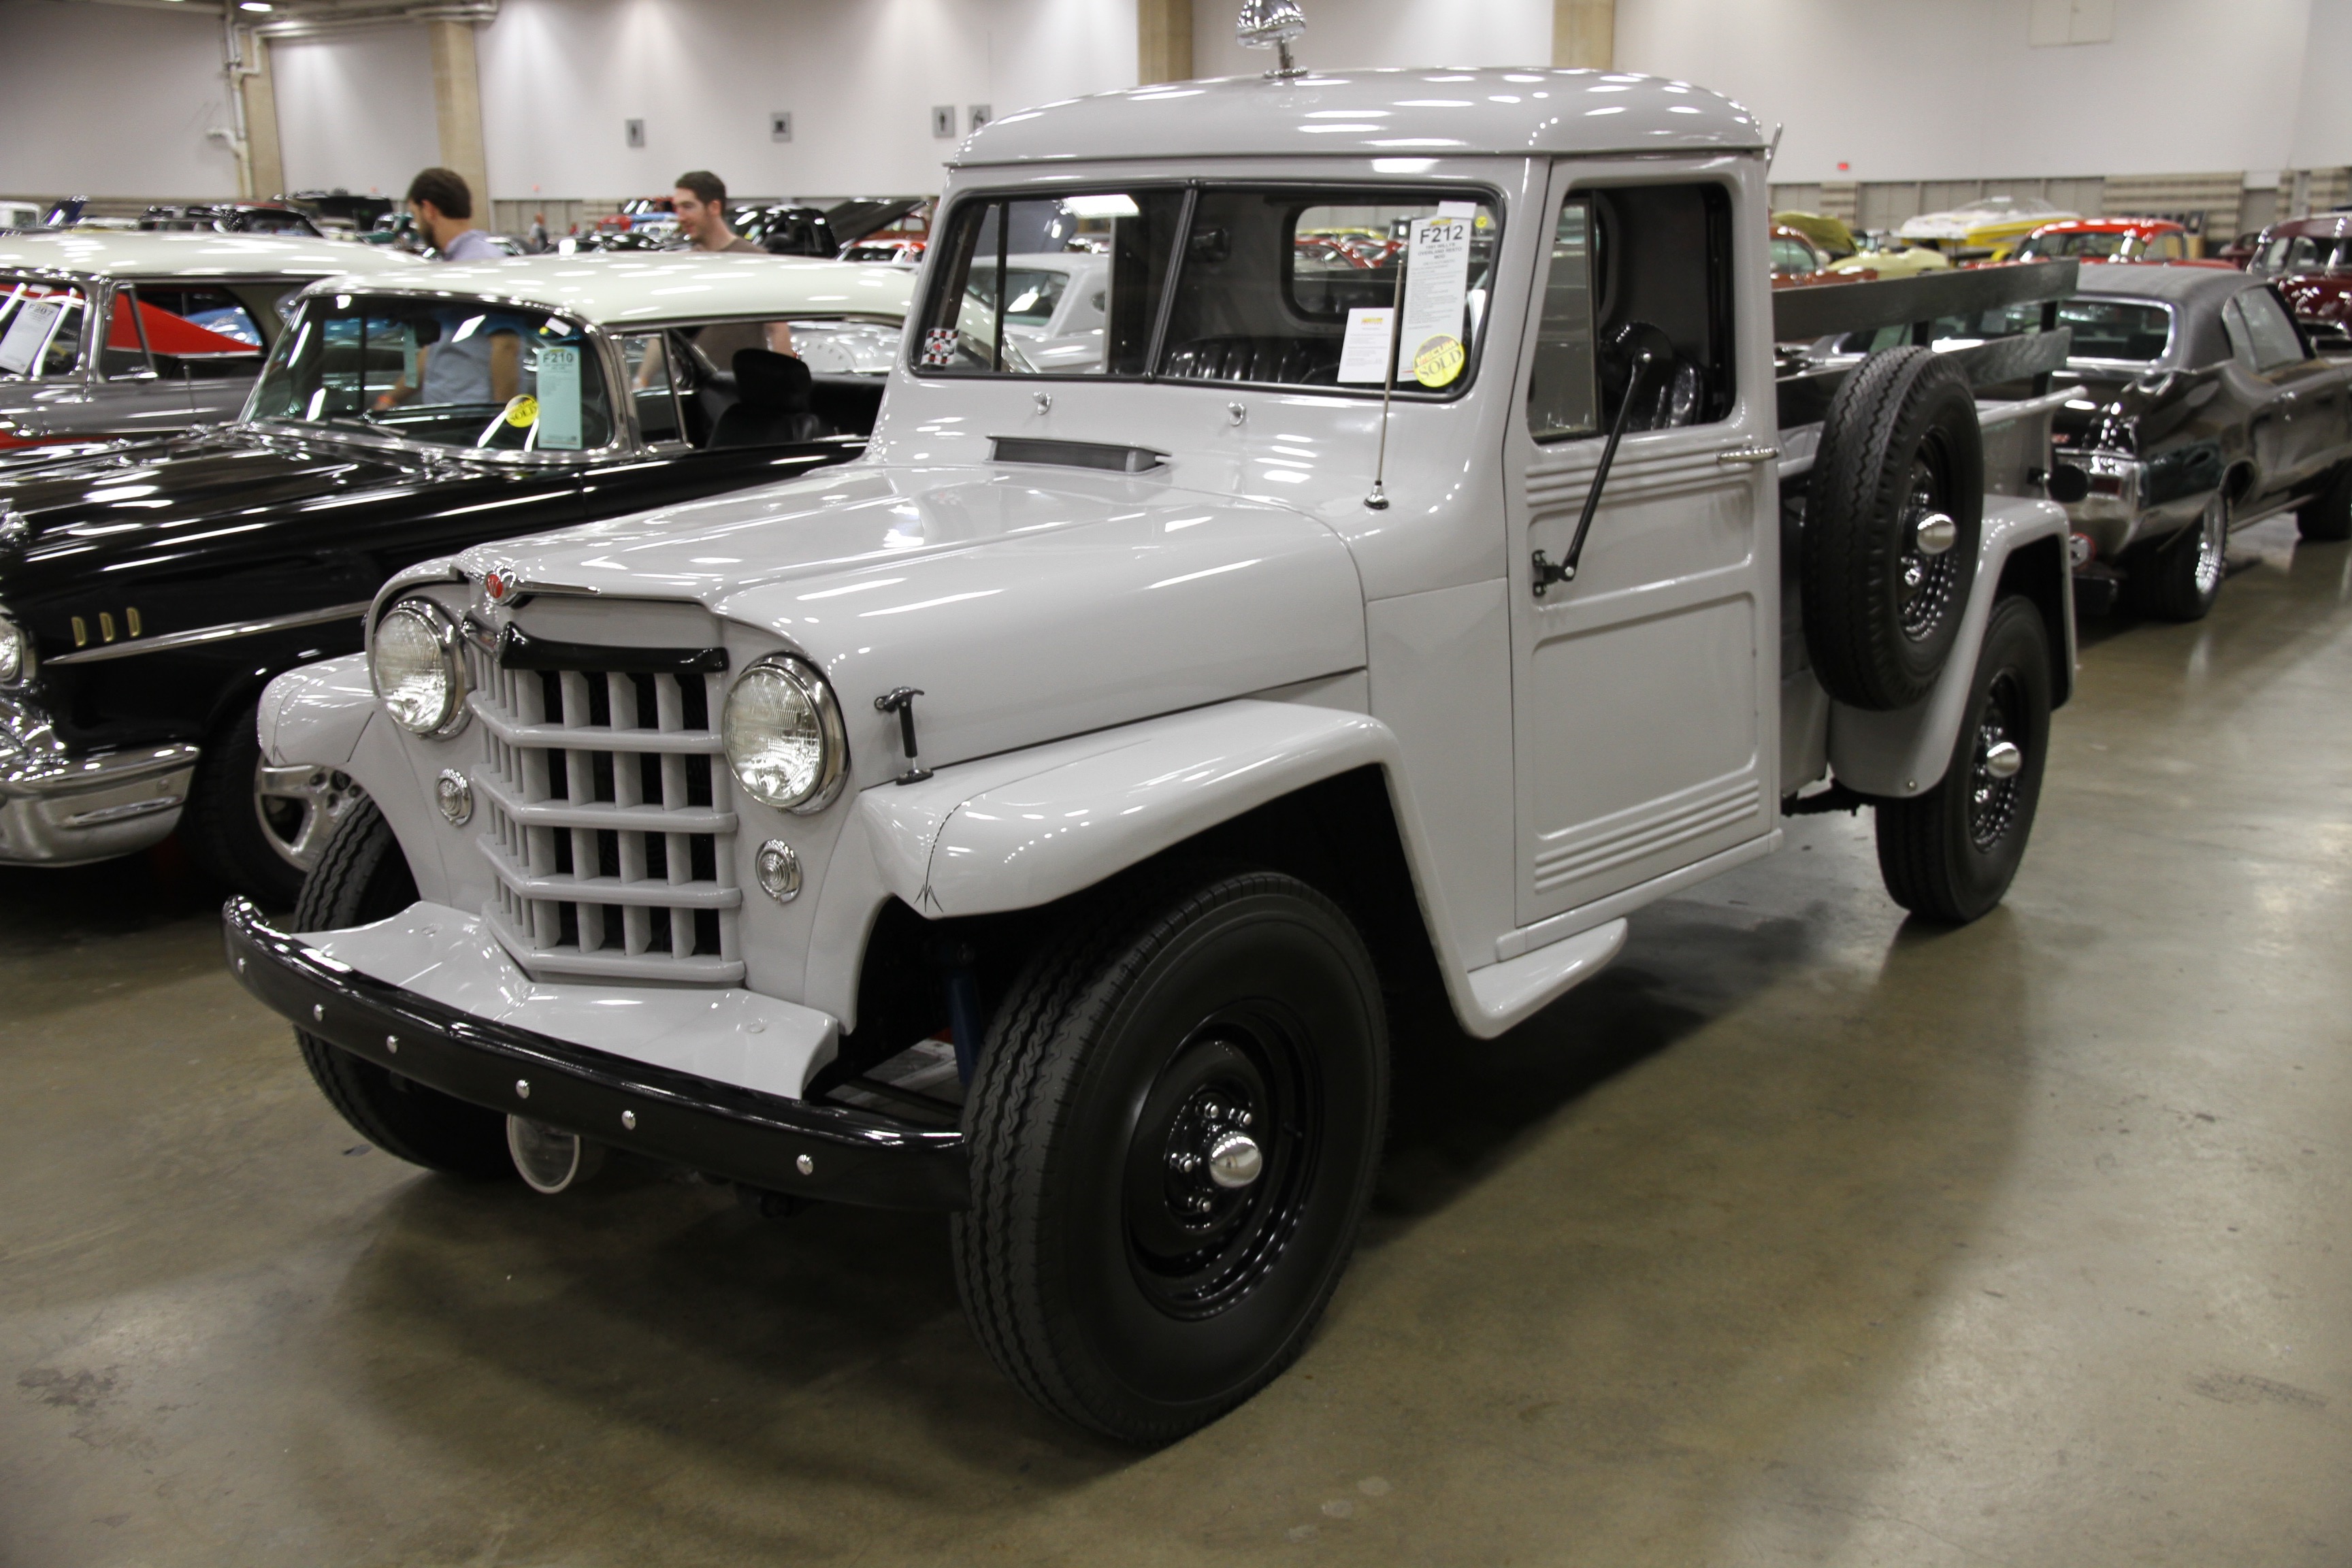 1950 willys-jeep 4-73 1 ton